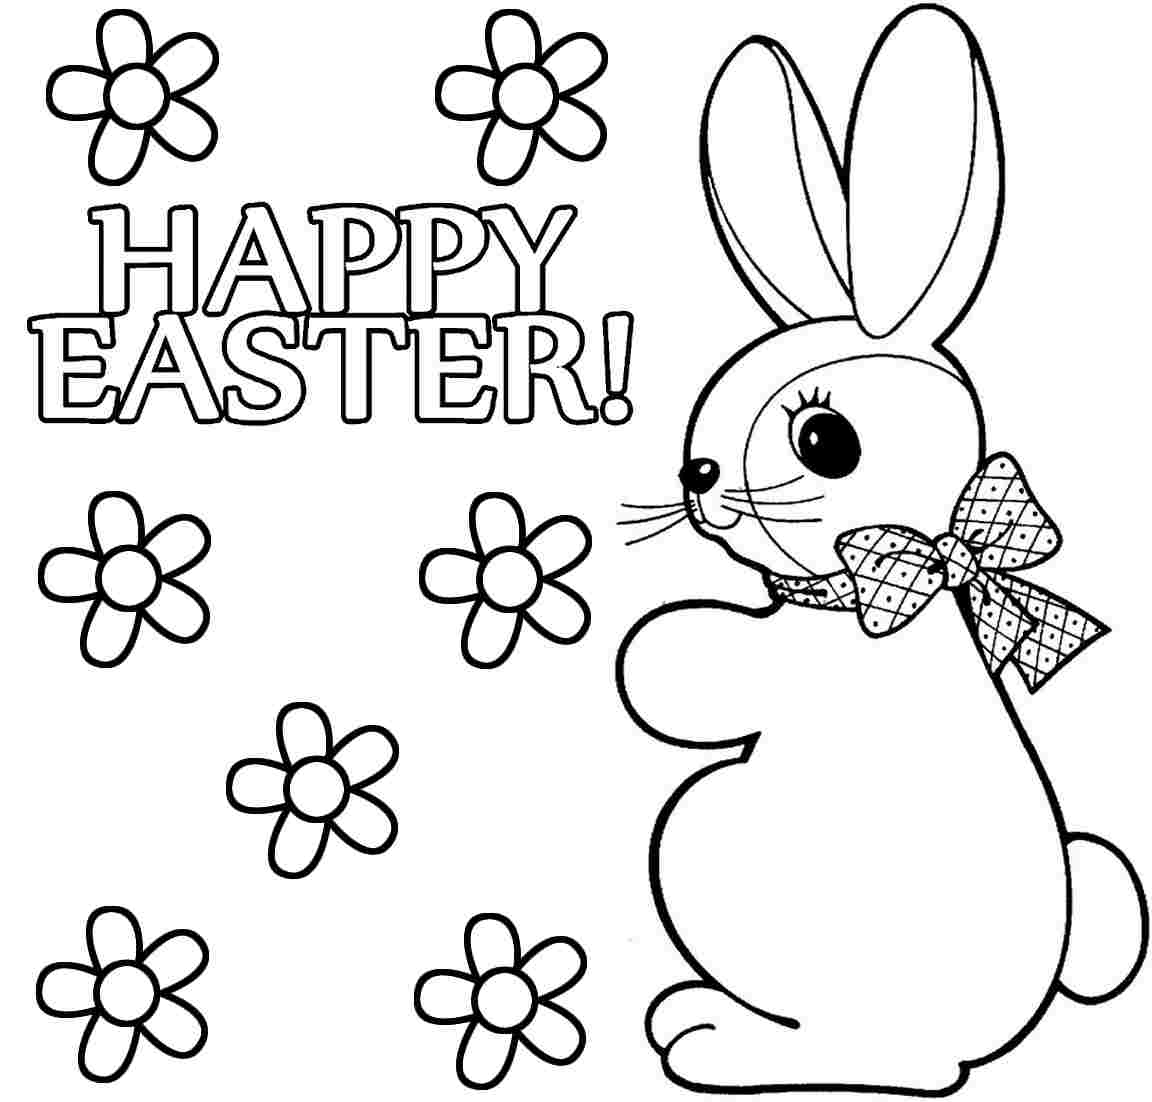 Free Online Printable Bunny Coloring Pages - Printable Templates Free